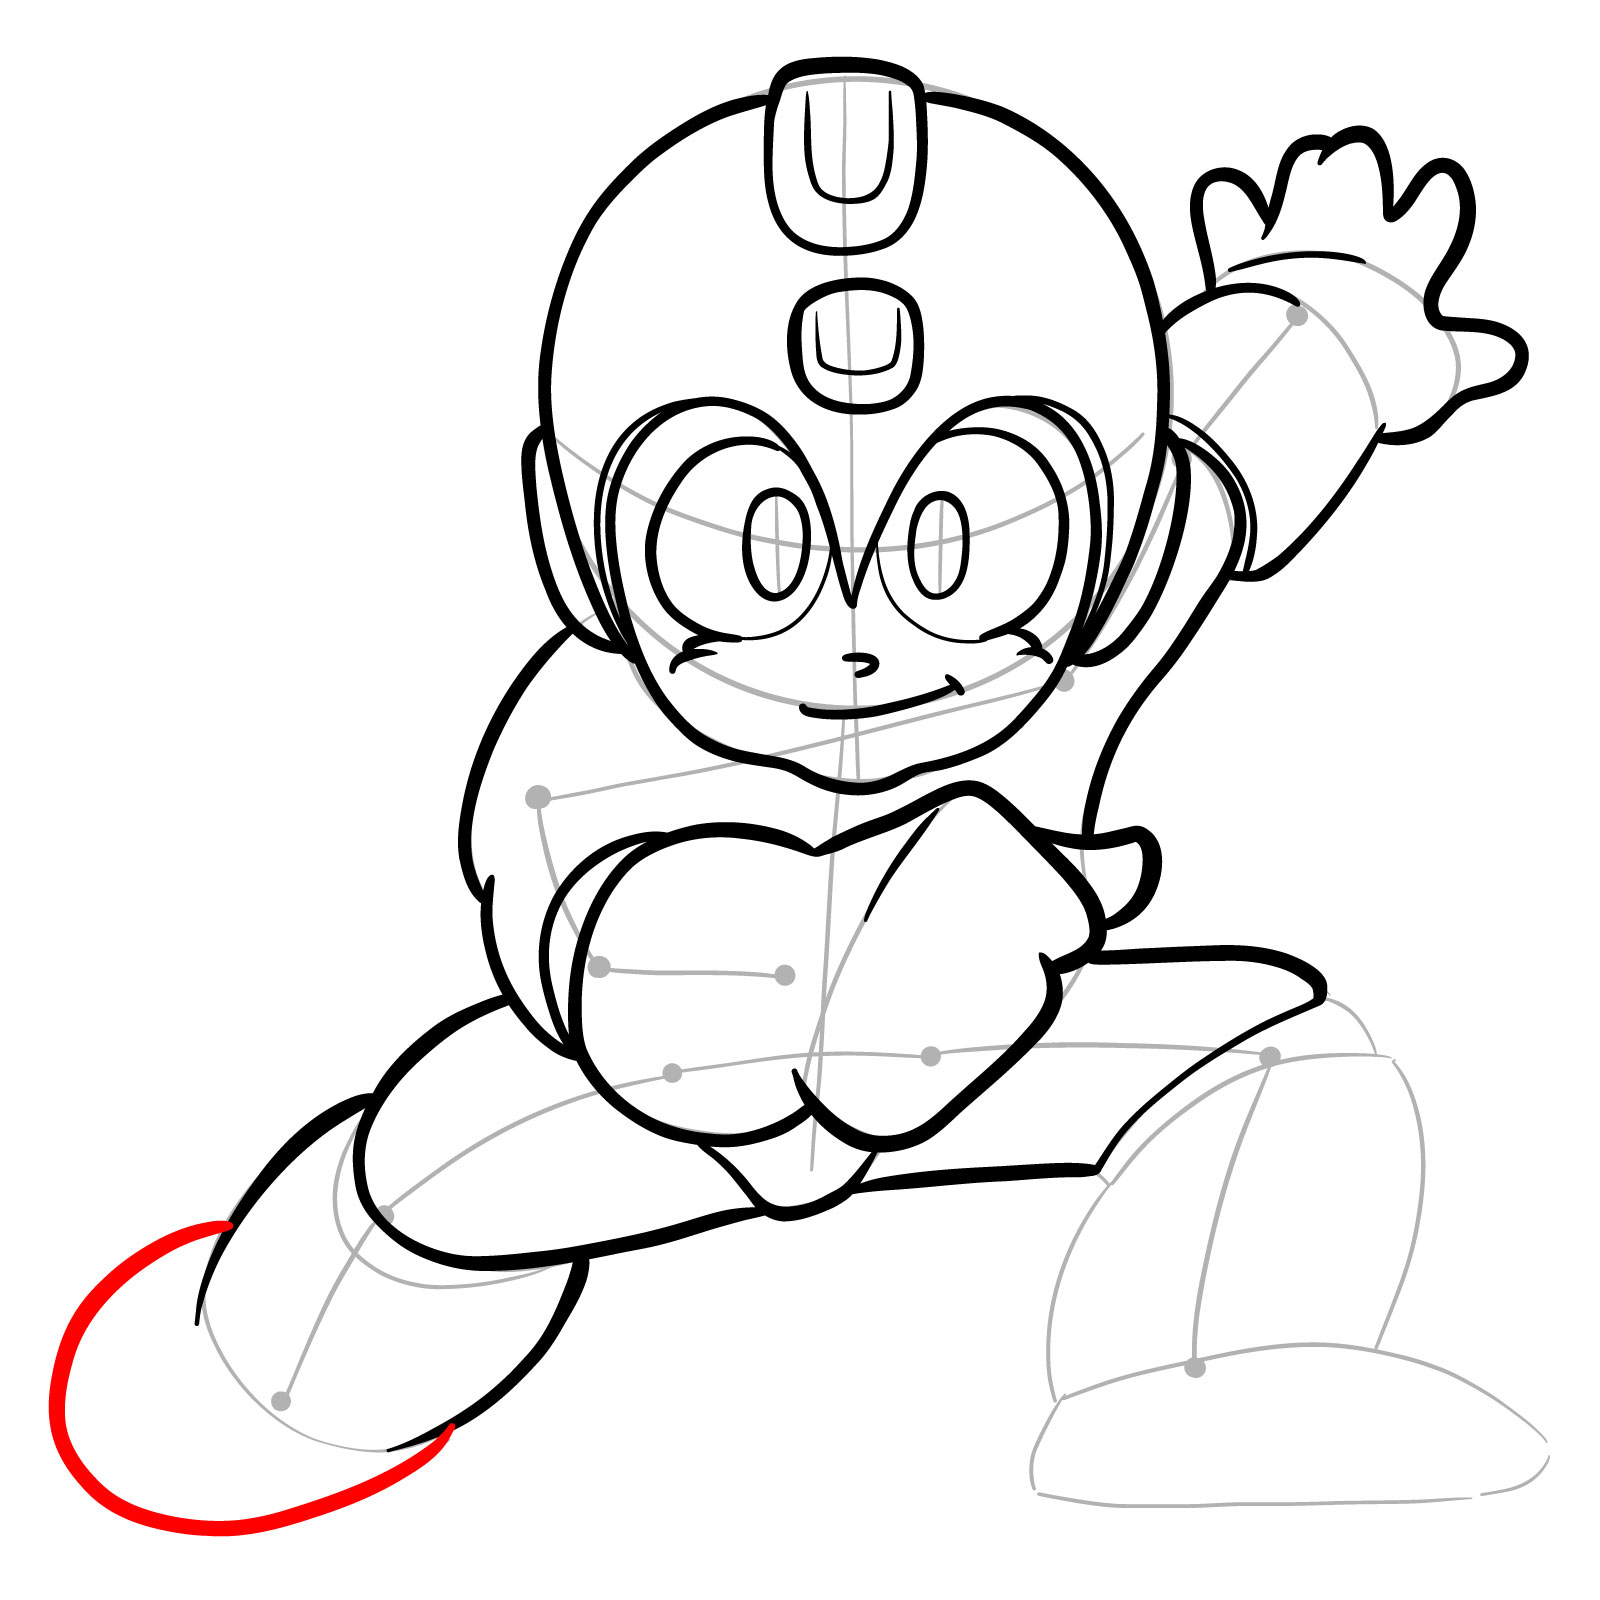 How to draw Mega Man from the original game - step 22